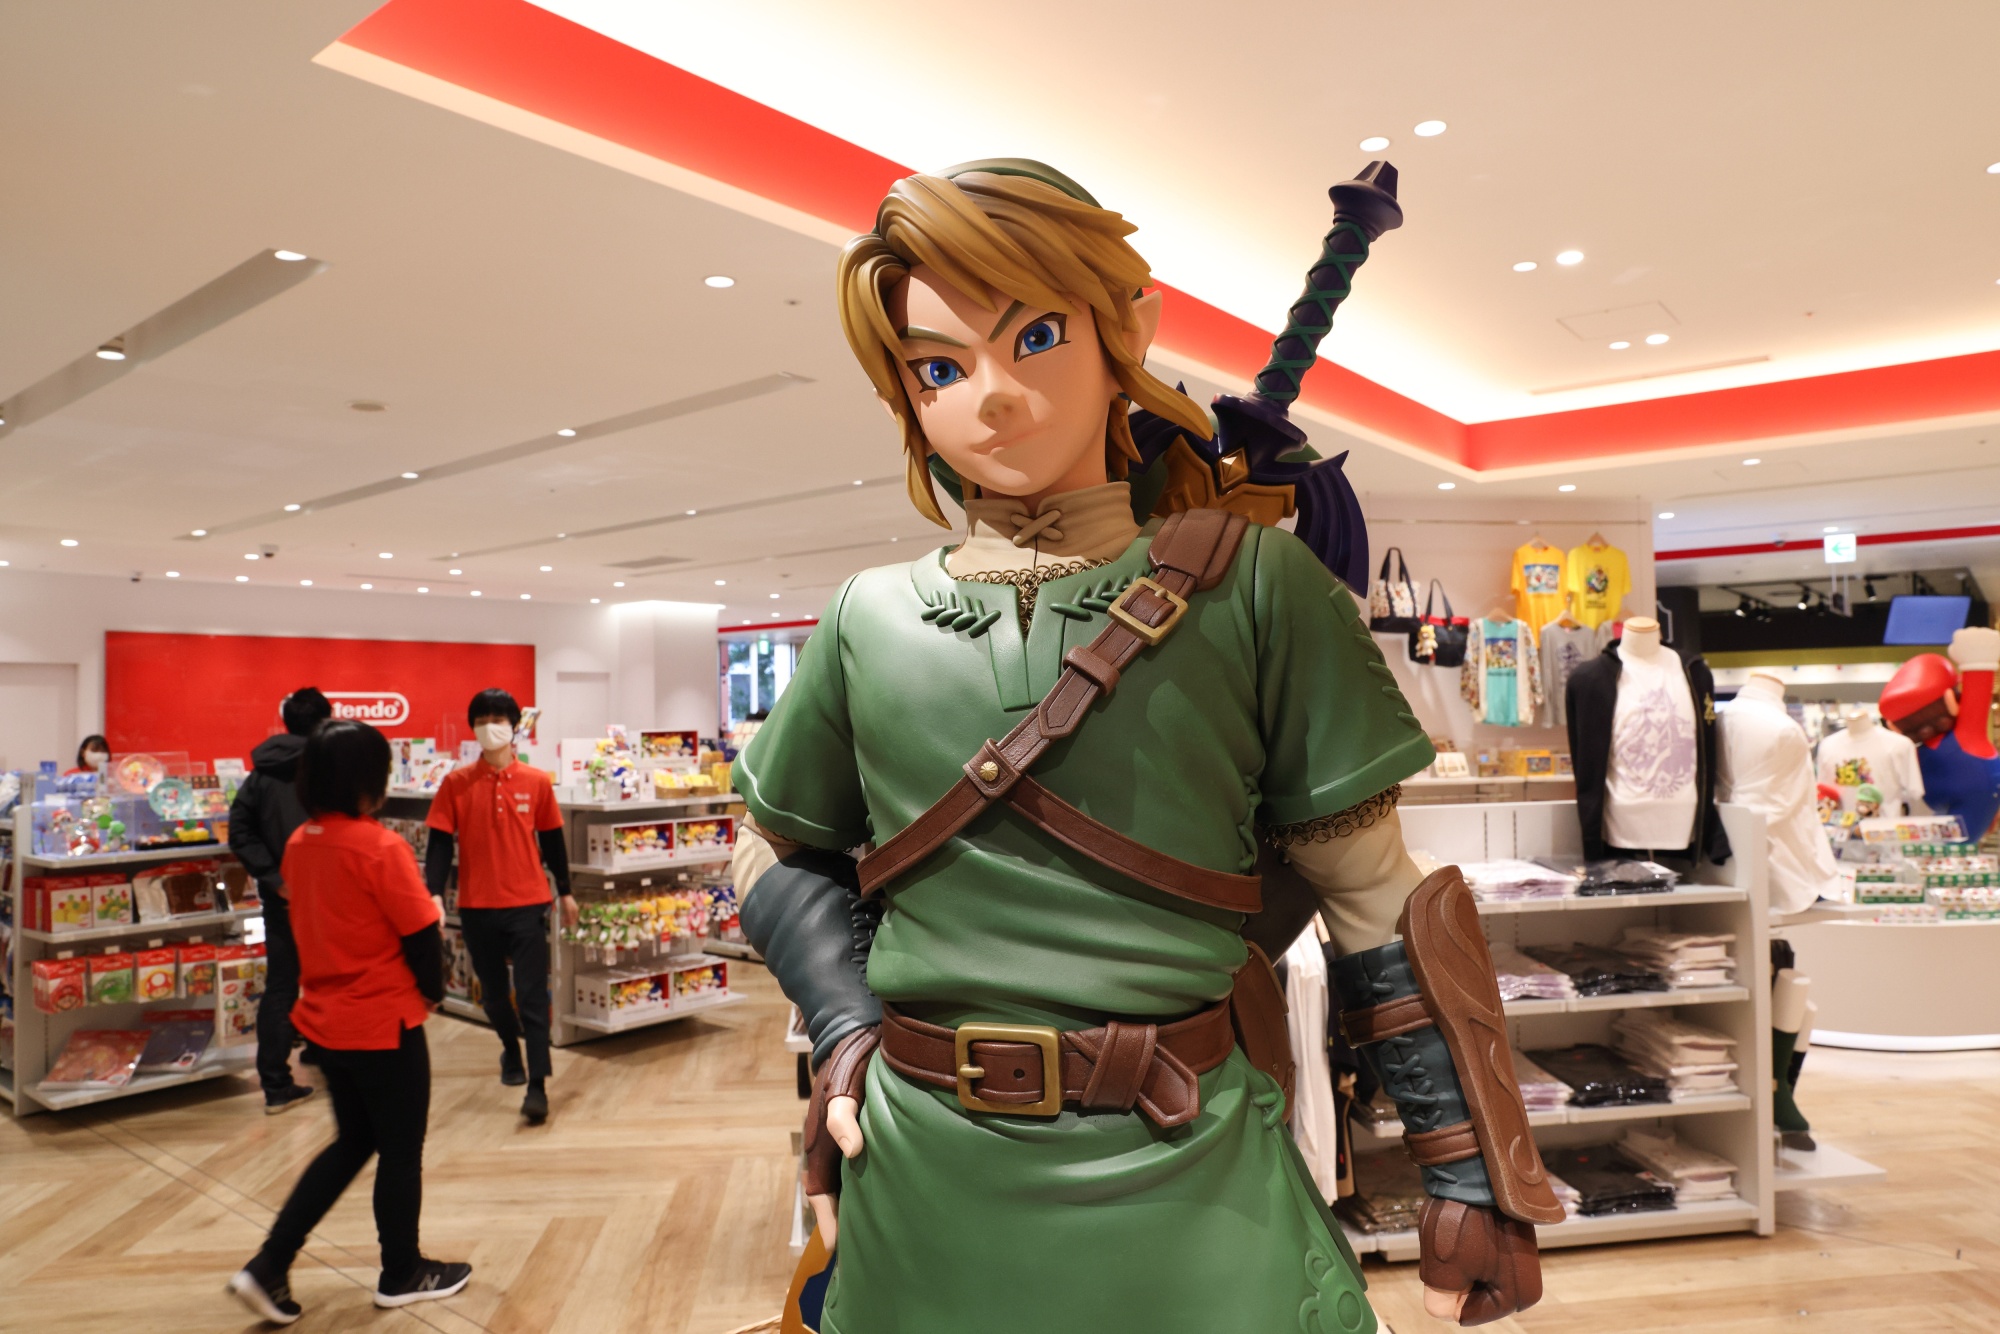 The Legend of Zelda live-action movie is a terrible idea for one reason